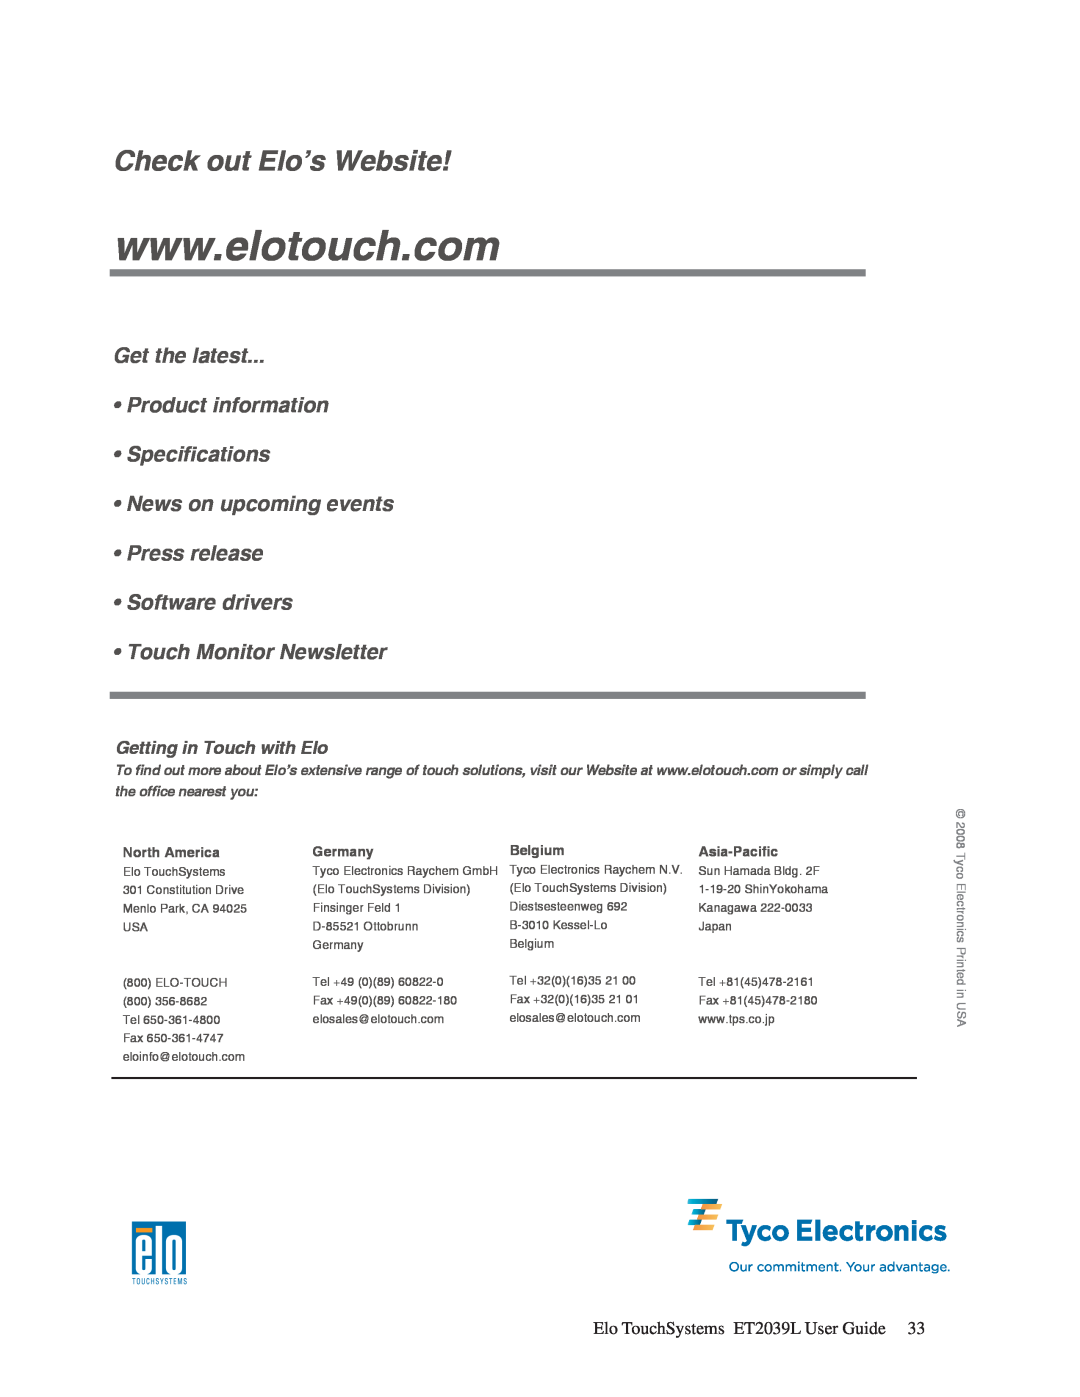 Elo TouchSystems ET2039L Check out Elo’s Website, Get the latest Product information Speciﬁcations, North America, Germany 